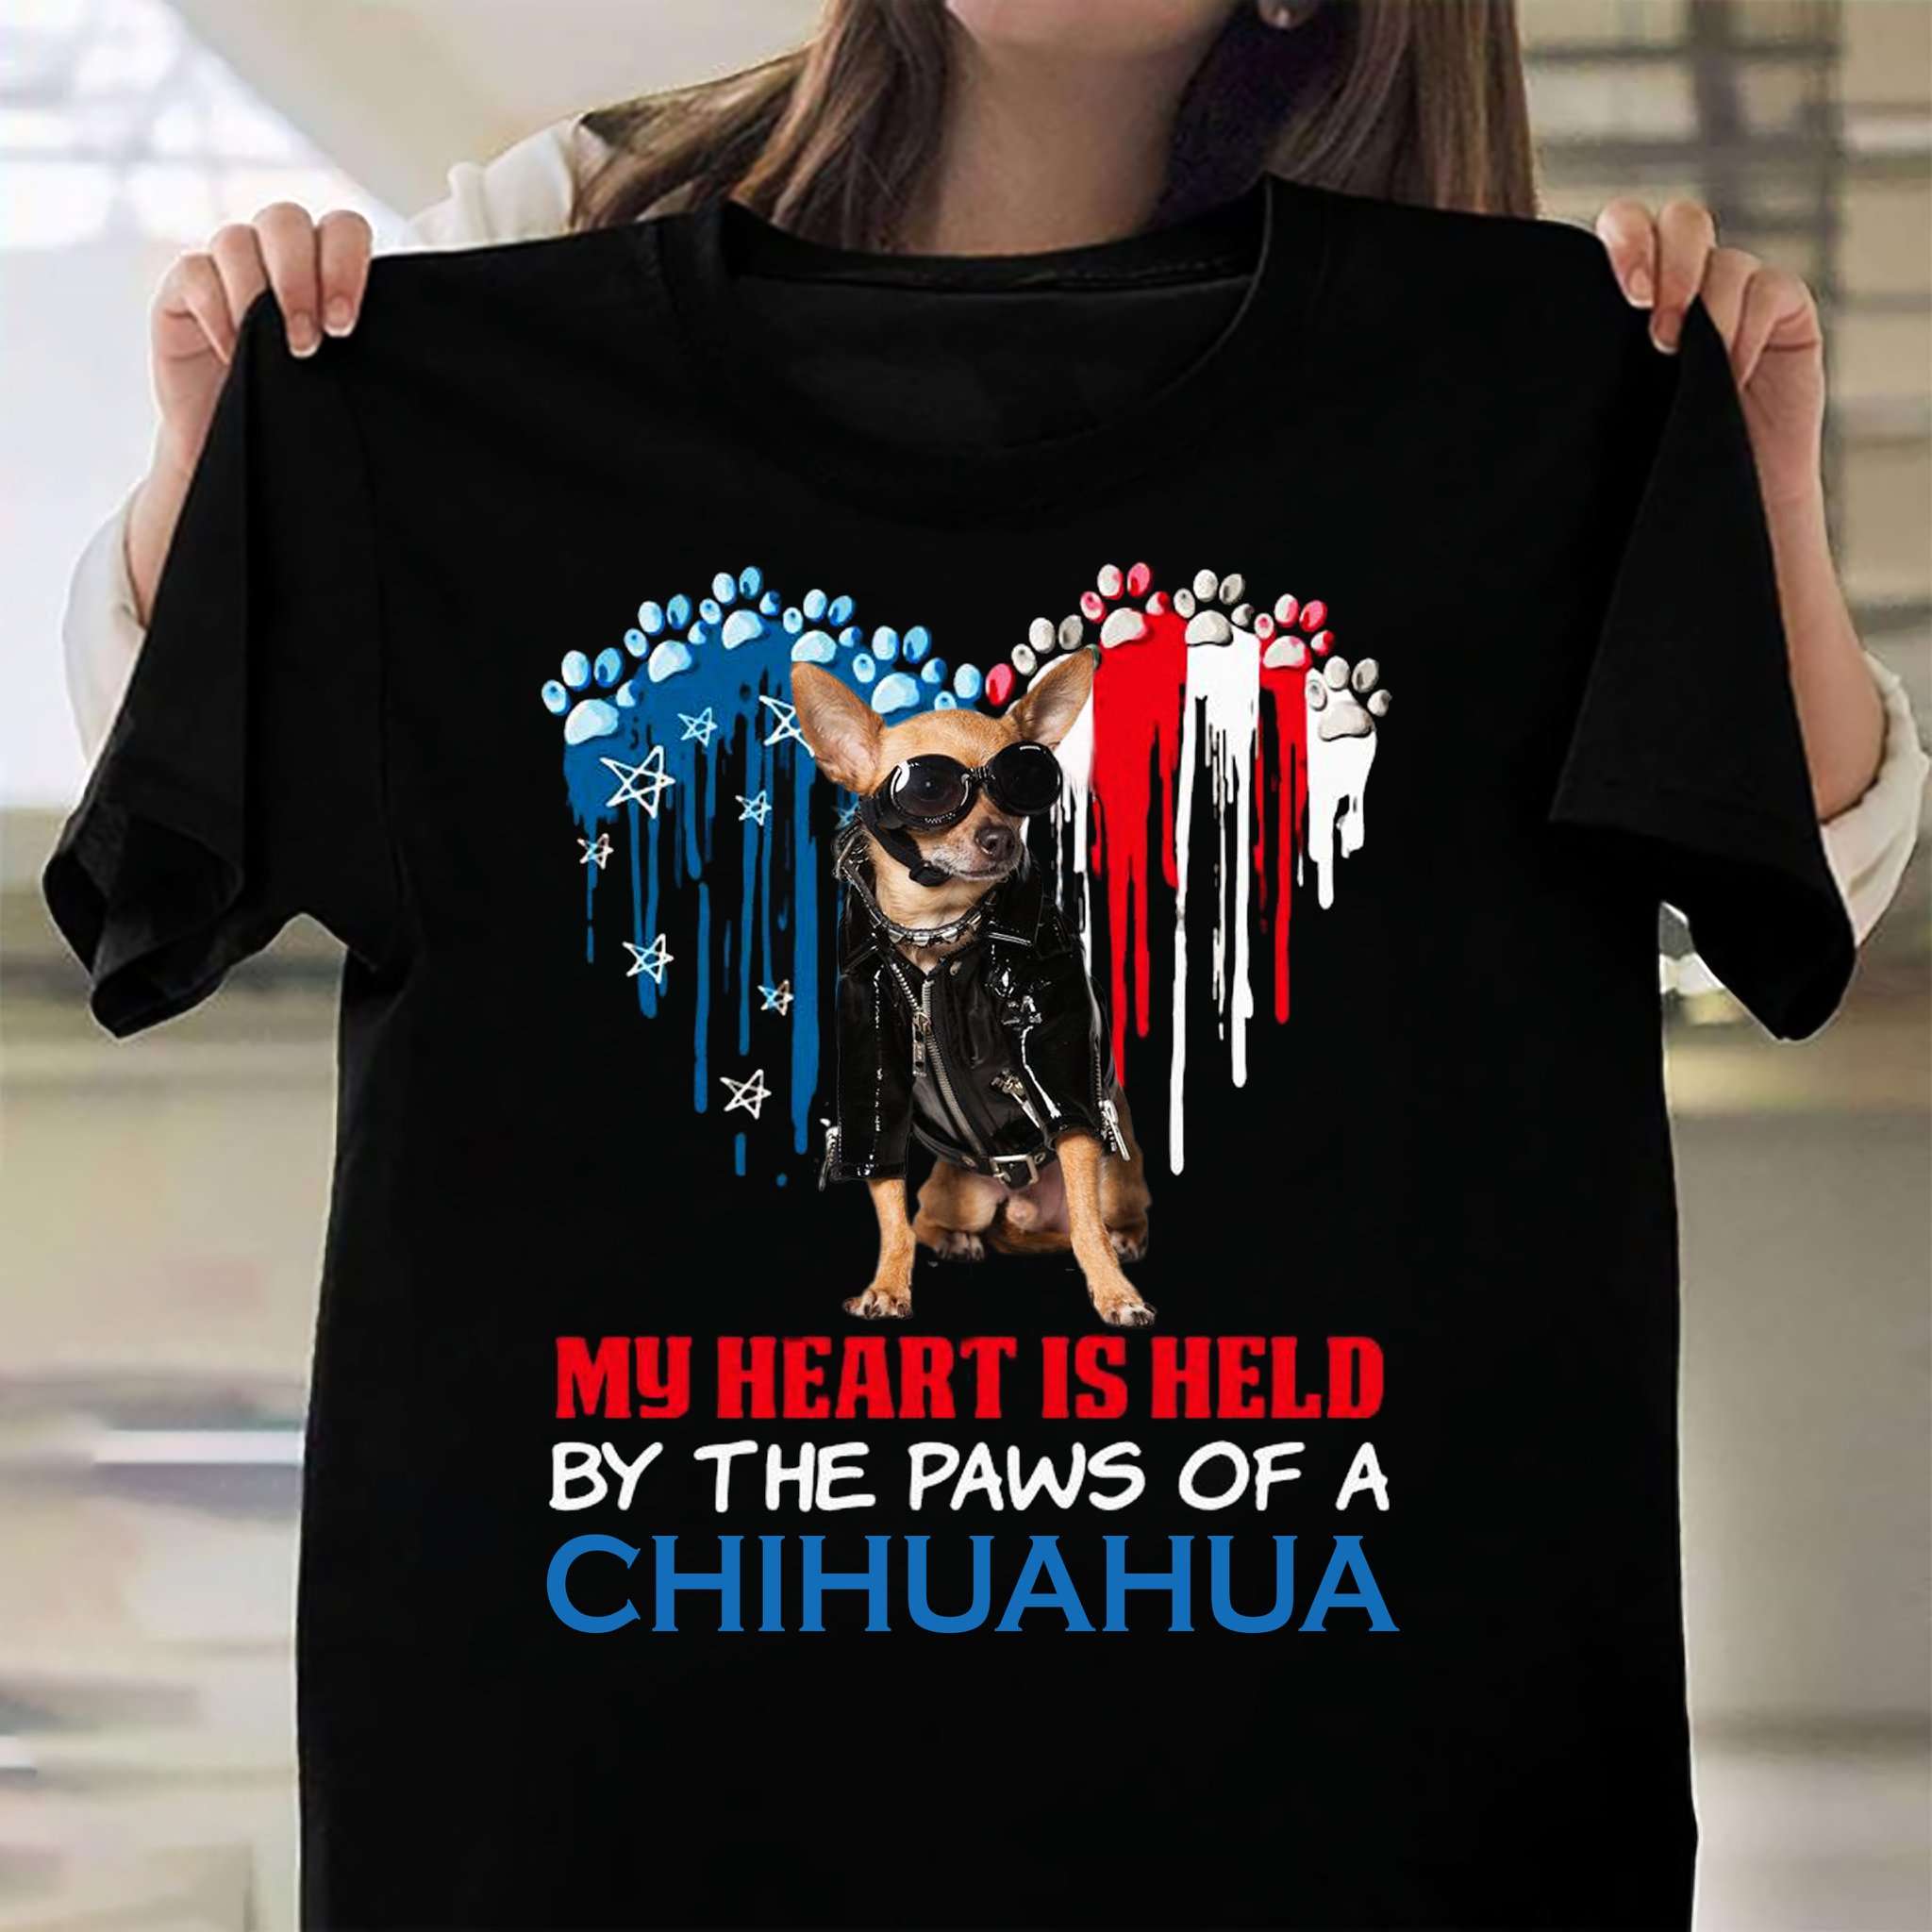 My heart is held by the paws of a Chihuahua - American loves Chihuahua, Chihuahua dog lover